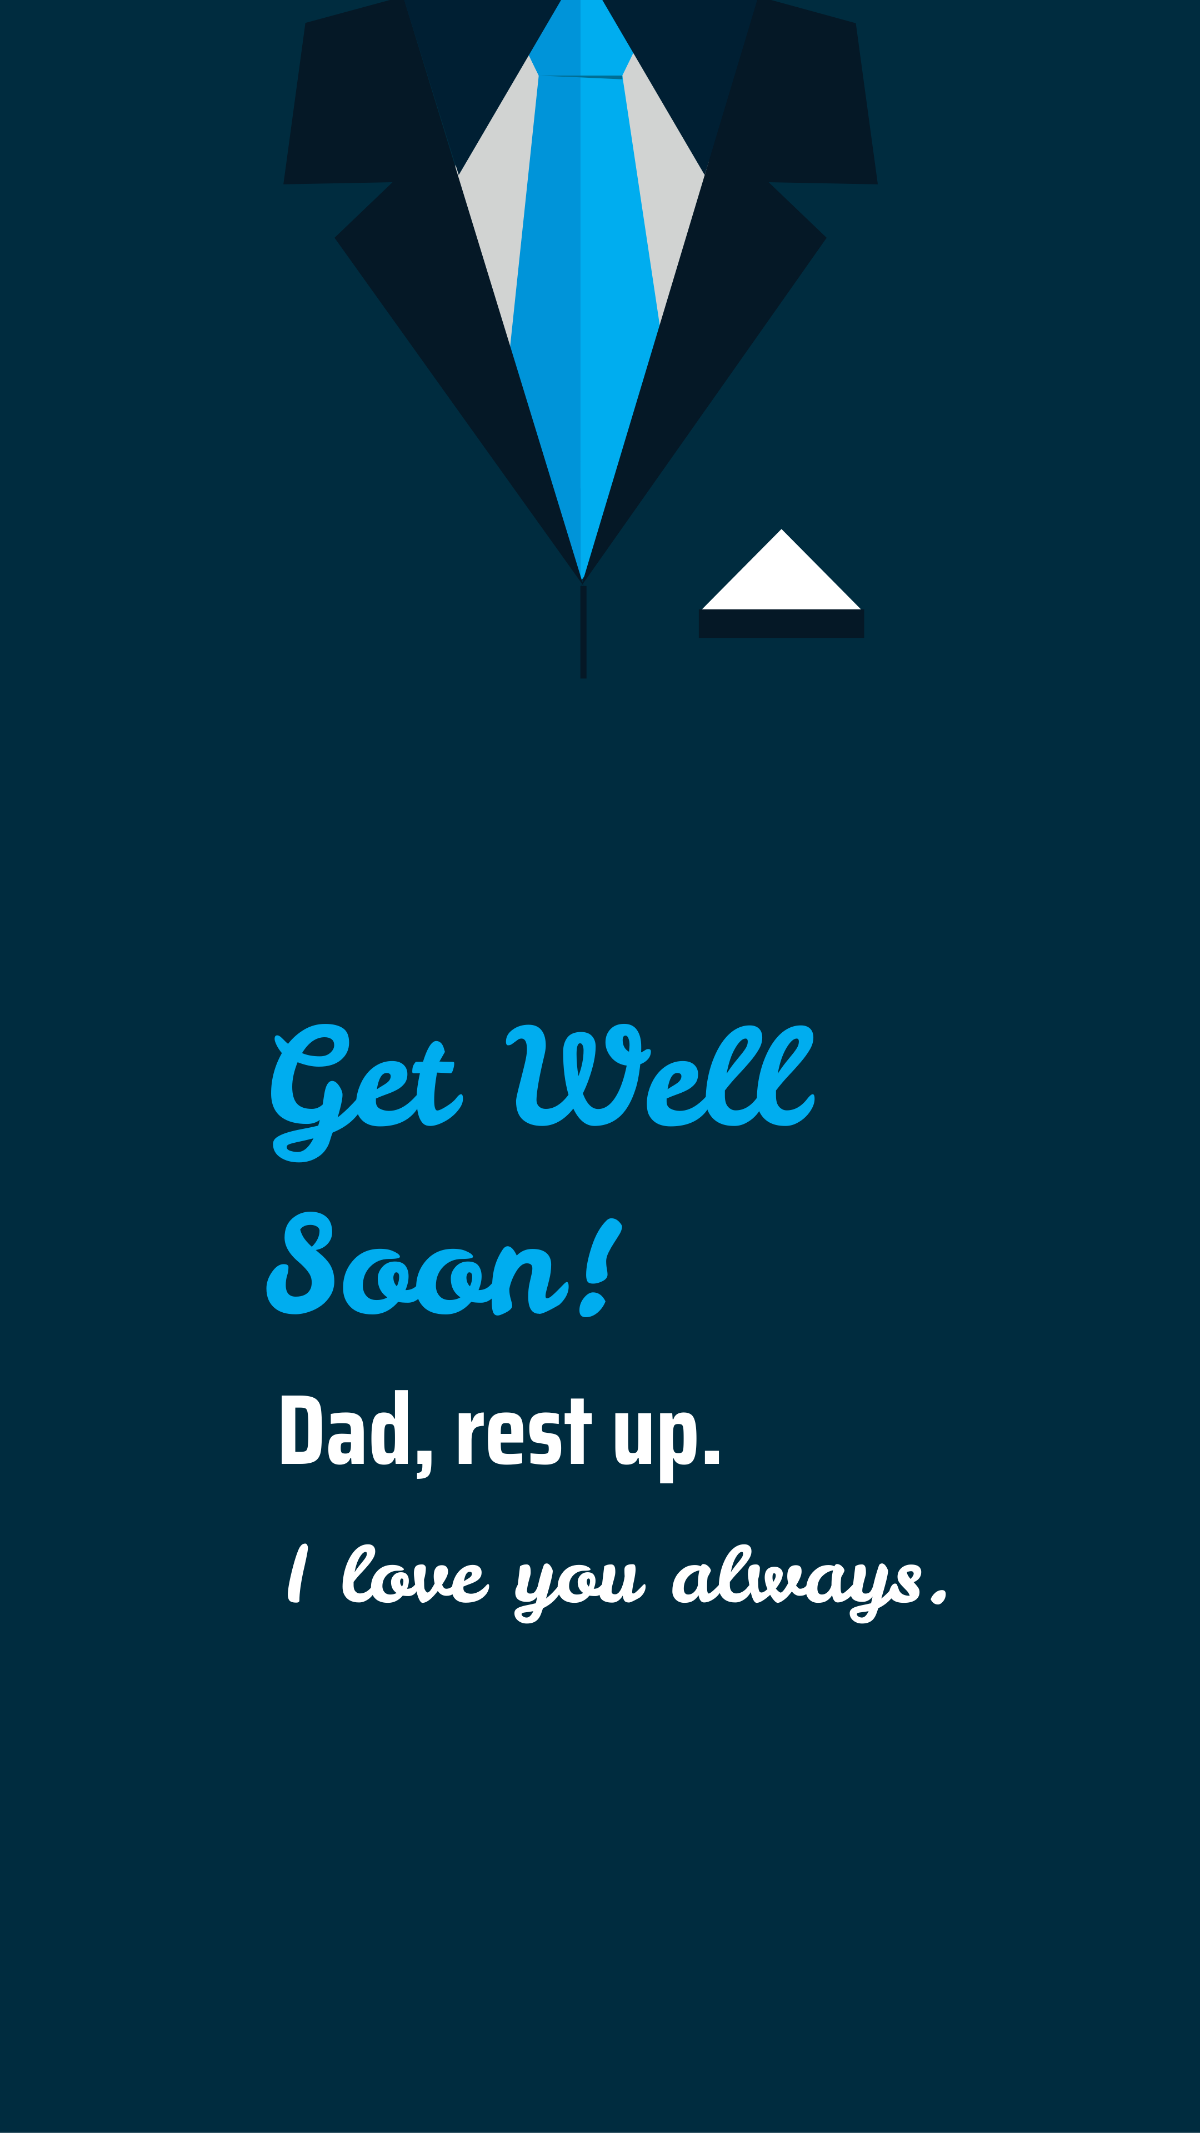 Get Well Soon Message For Dad